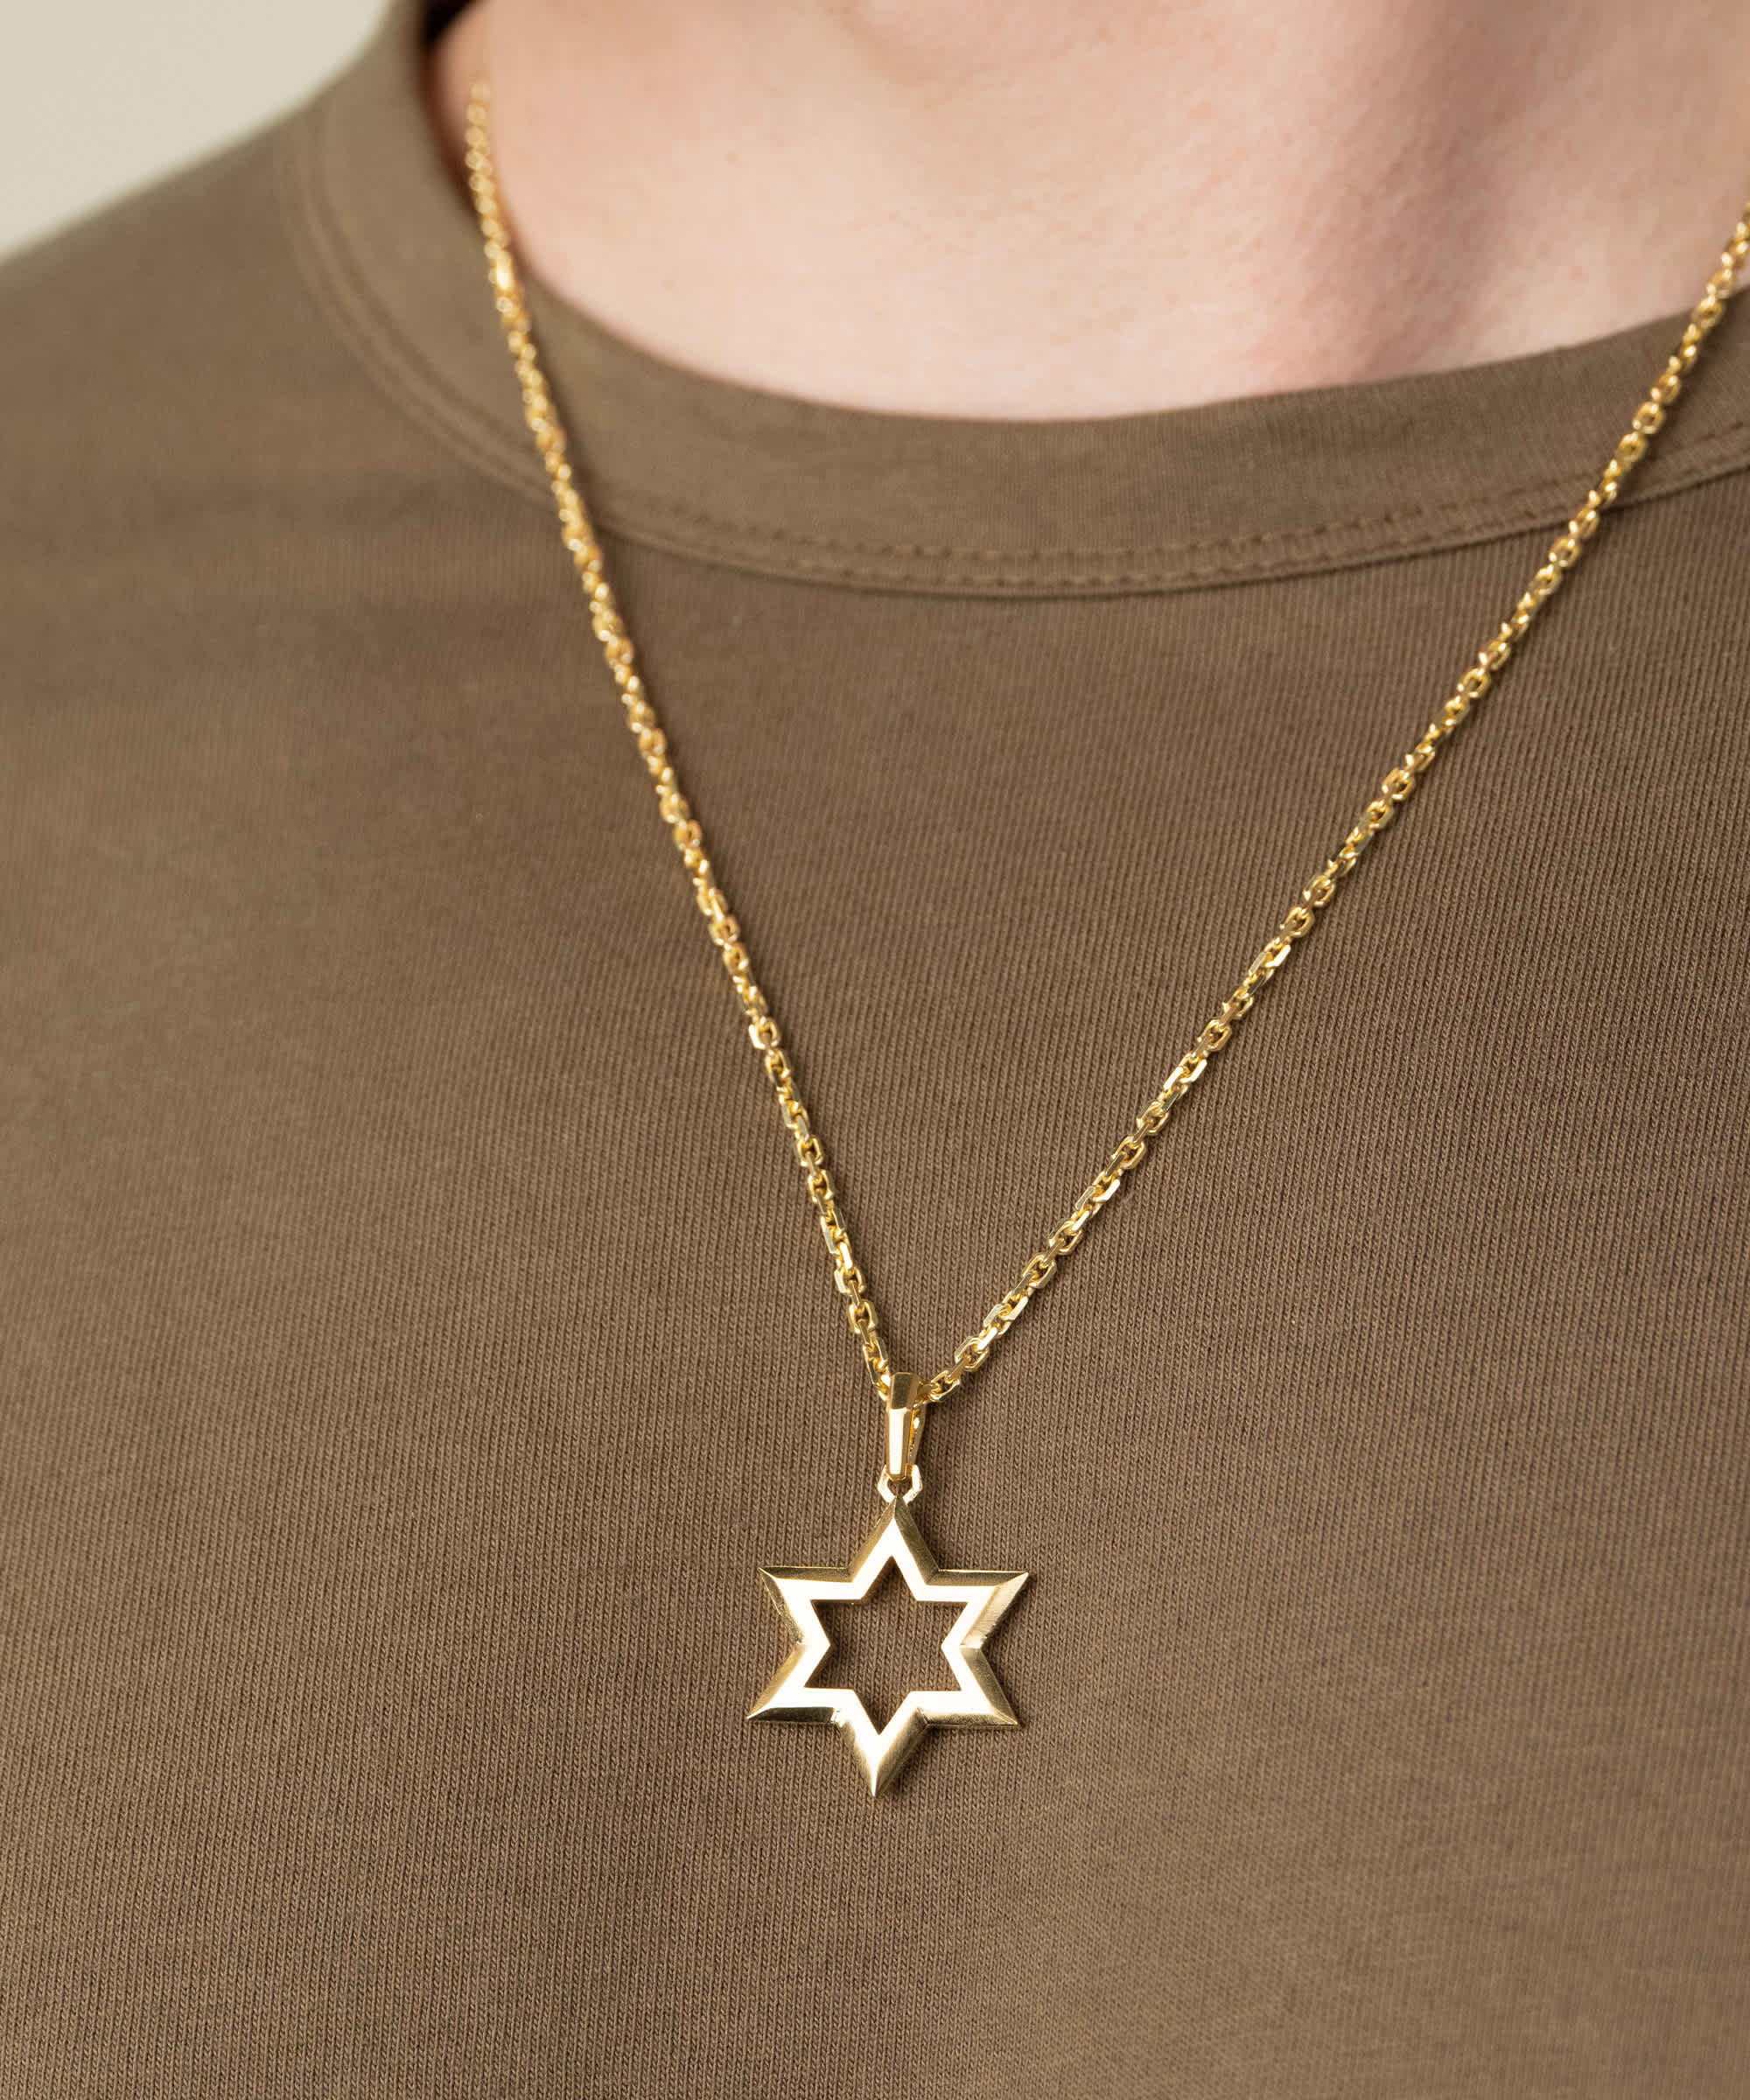 Chain Included - Gold Star of David Pendant Necklace